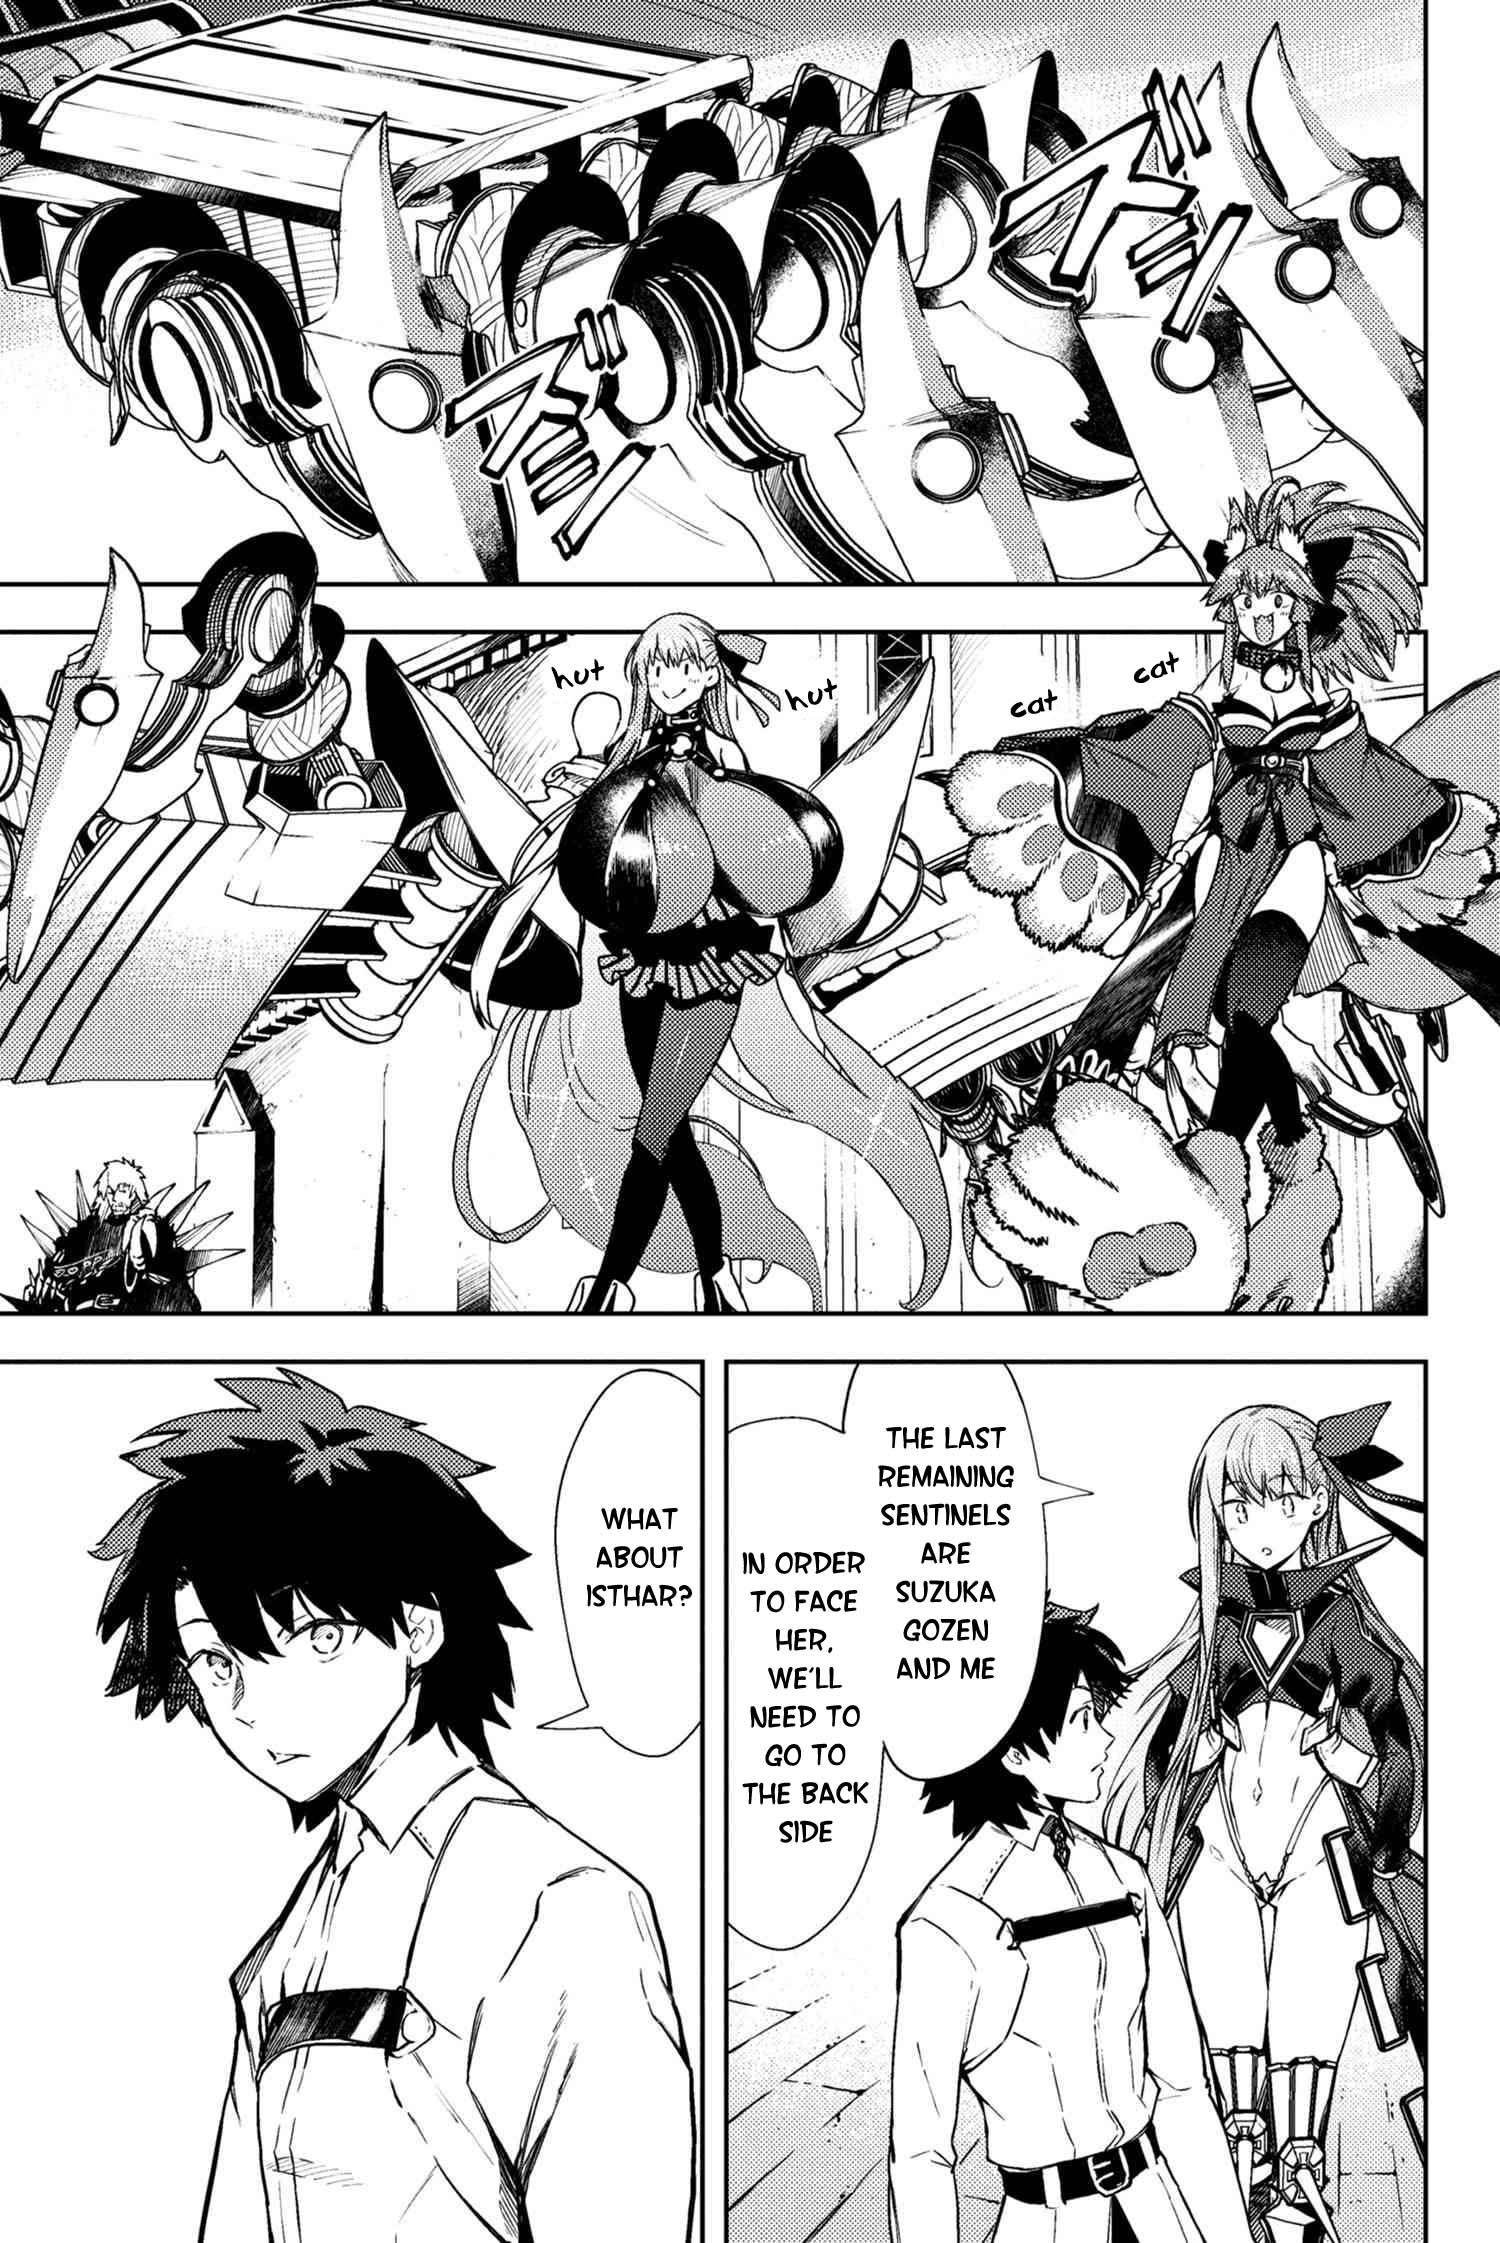 Fate/grand Order -Epic Of Remnant- Deep Sea Cyber-Paradise Se.ra.ph - 25.1 page 2-3c21dd63